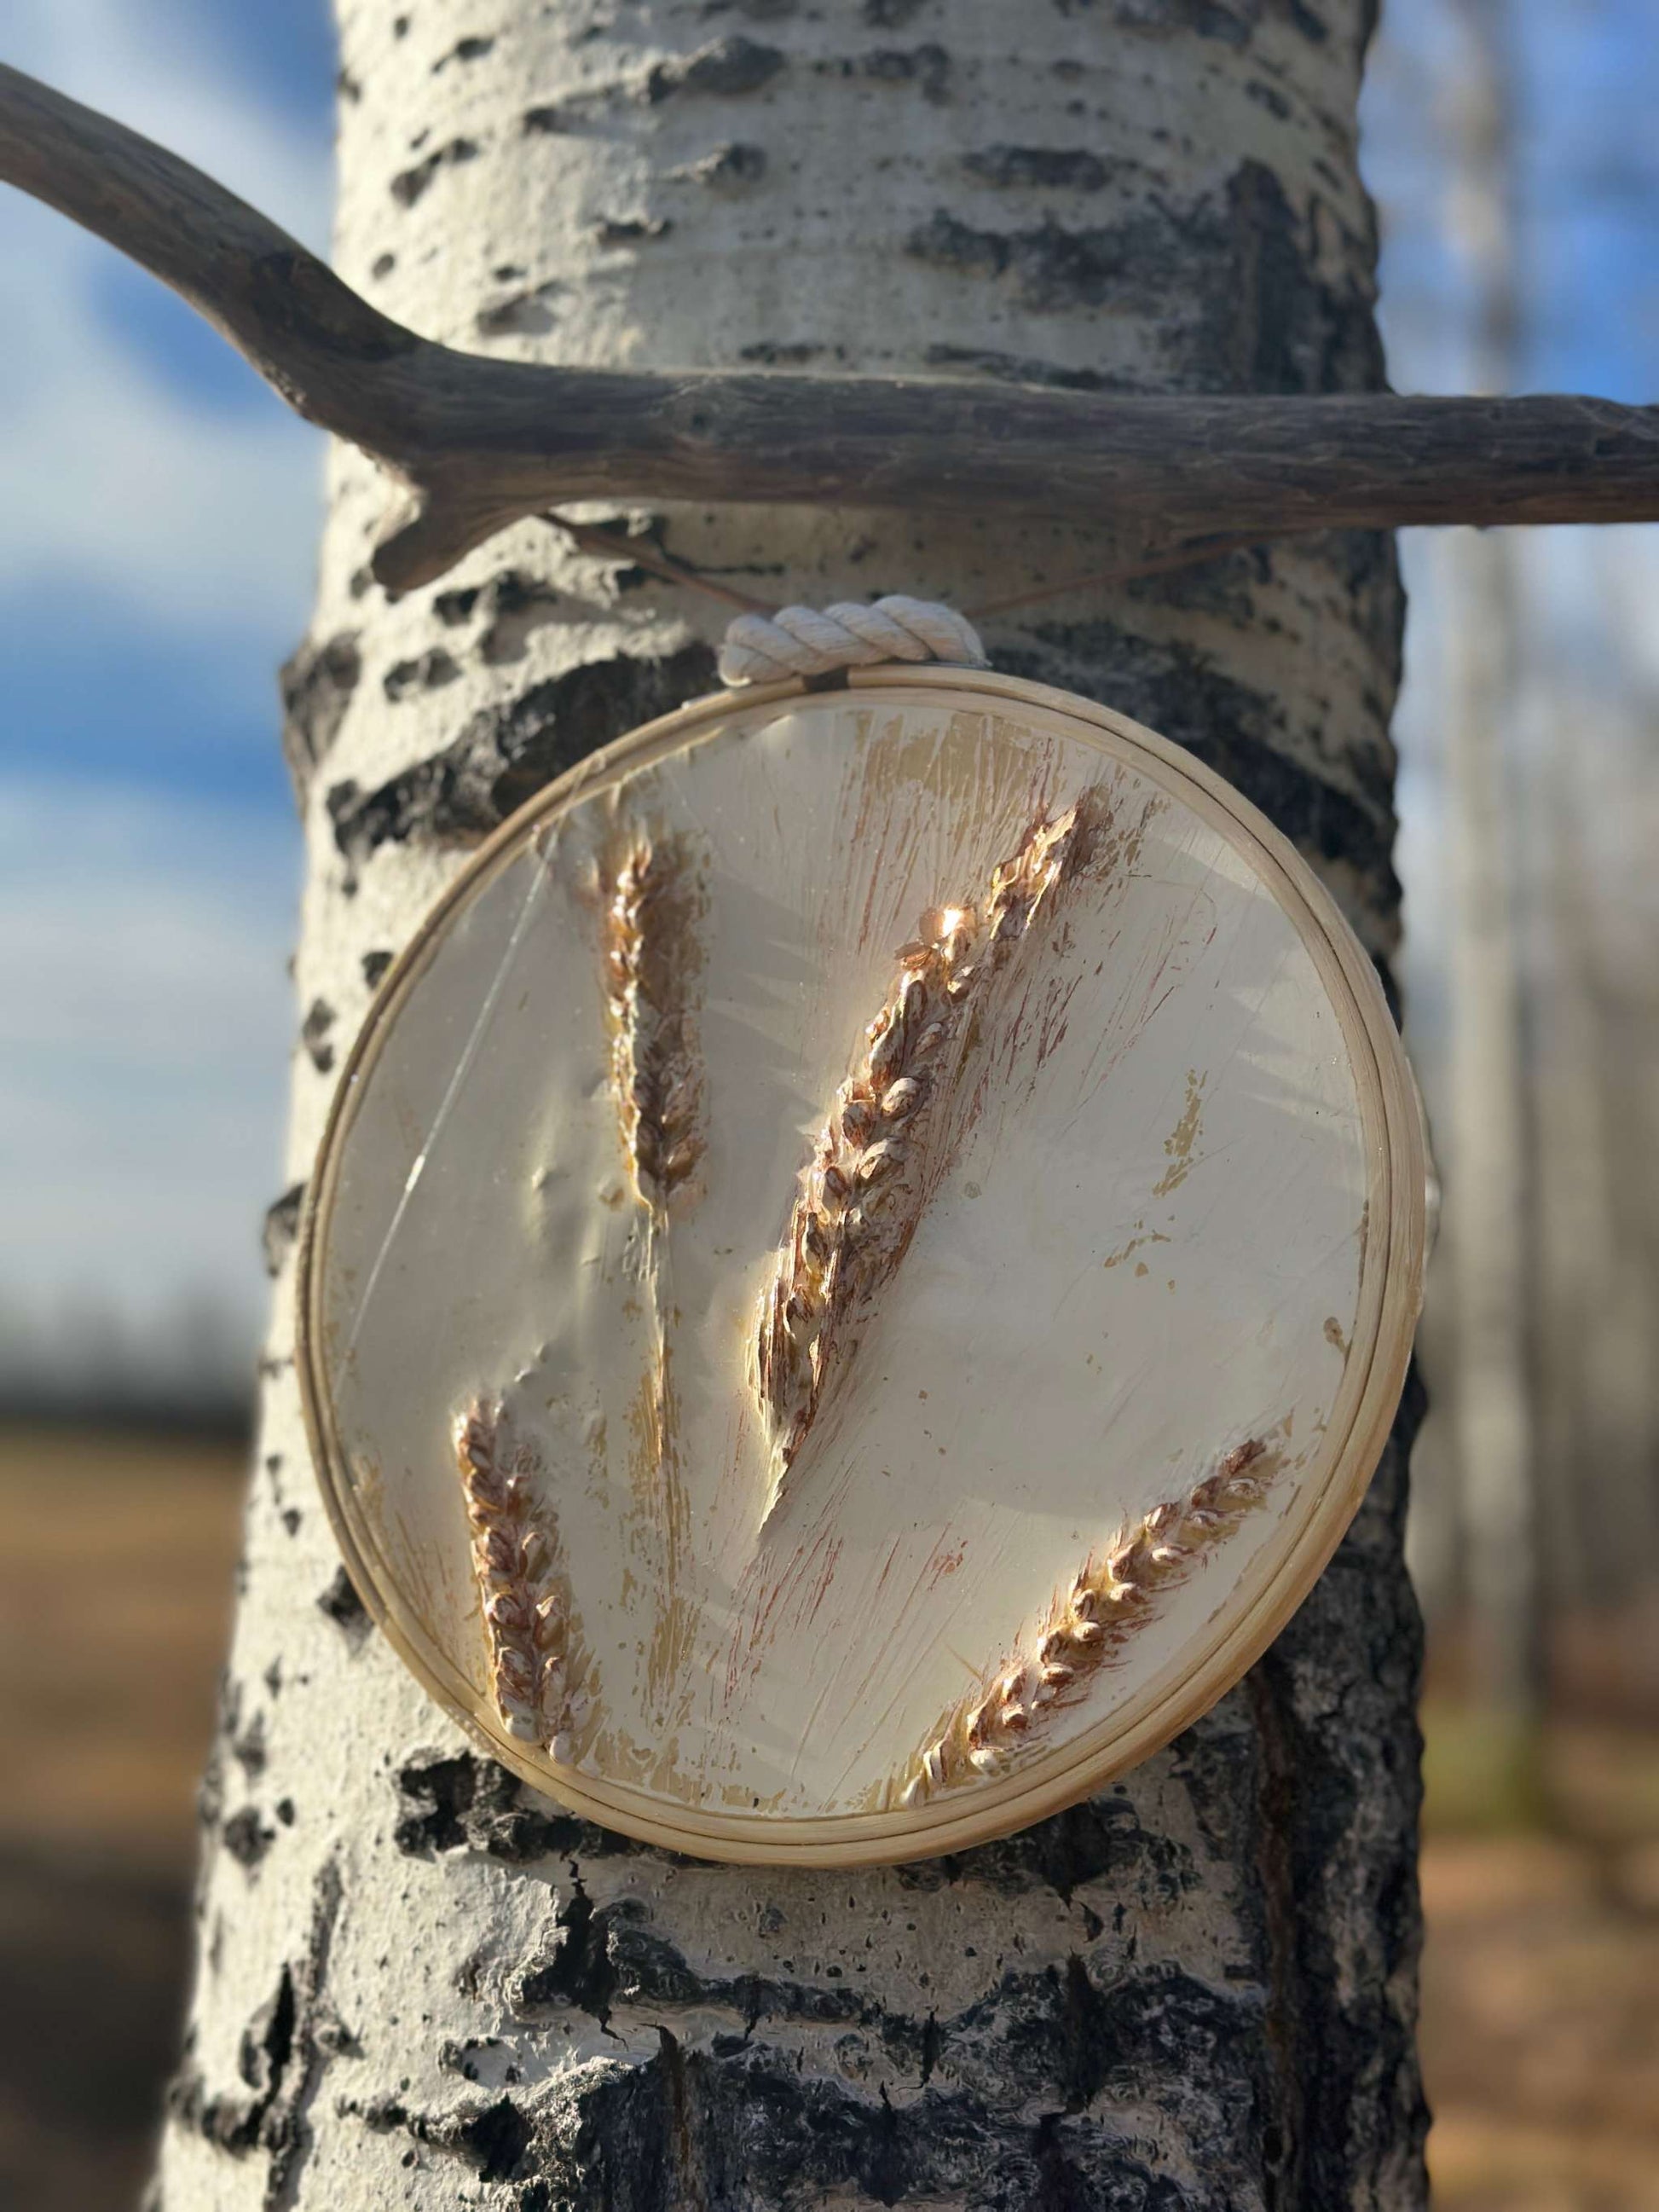 Field of Dreams - Handmade Epoxy Resin Wall Art Insipred by Nature